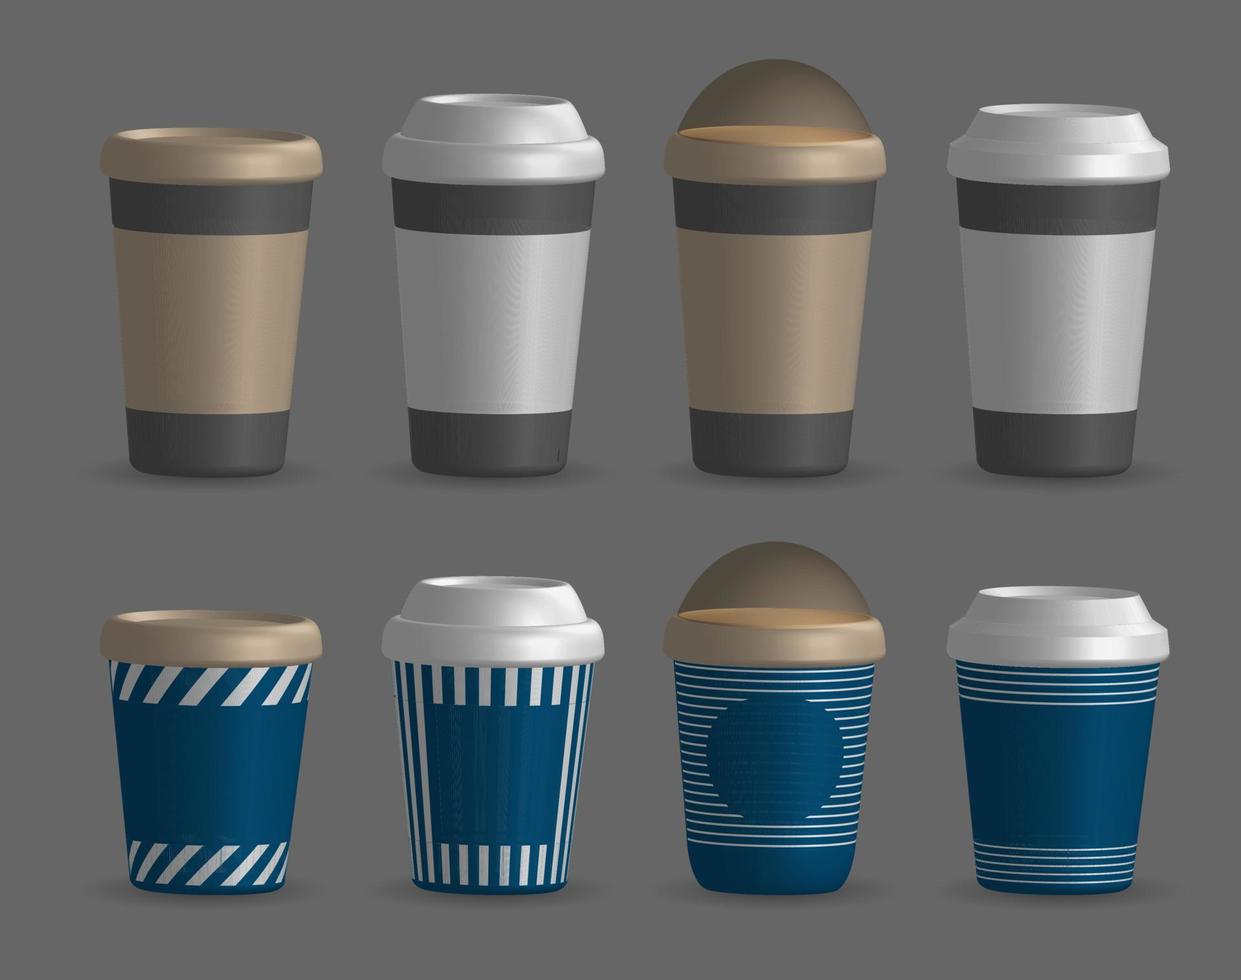 Set of closed paper cups. Collection of Plastic Cups with Covers for Drinks, Front View Mockup Design Templates. 3d vector realistic illustration